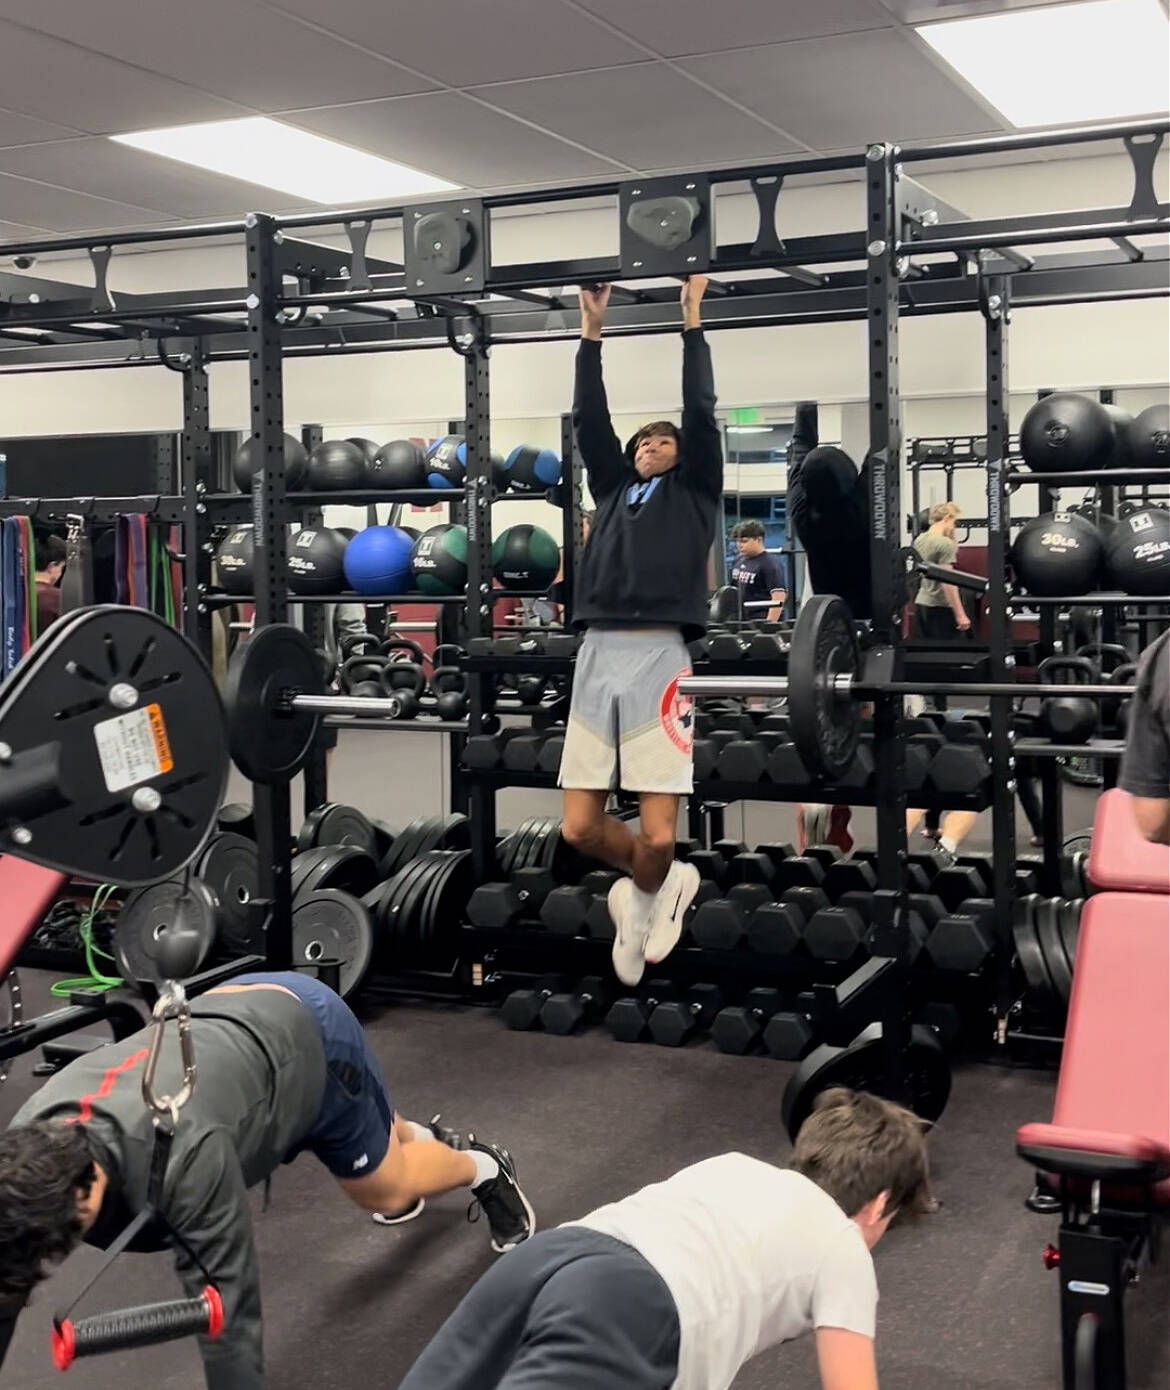 Chase Warnick powers through some pull-ups while other student athletes engage in push-ups at the new fitness center at Mercer Island High School. Courtesy photo